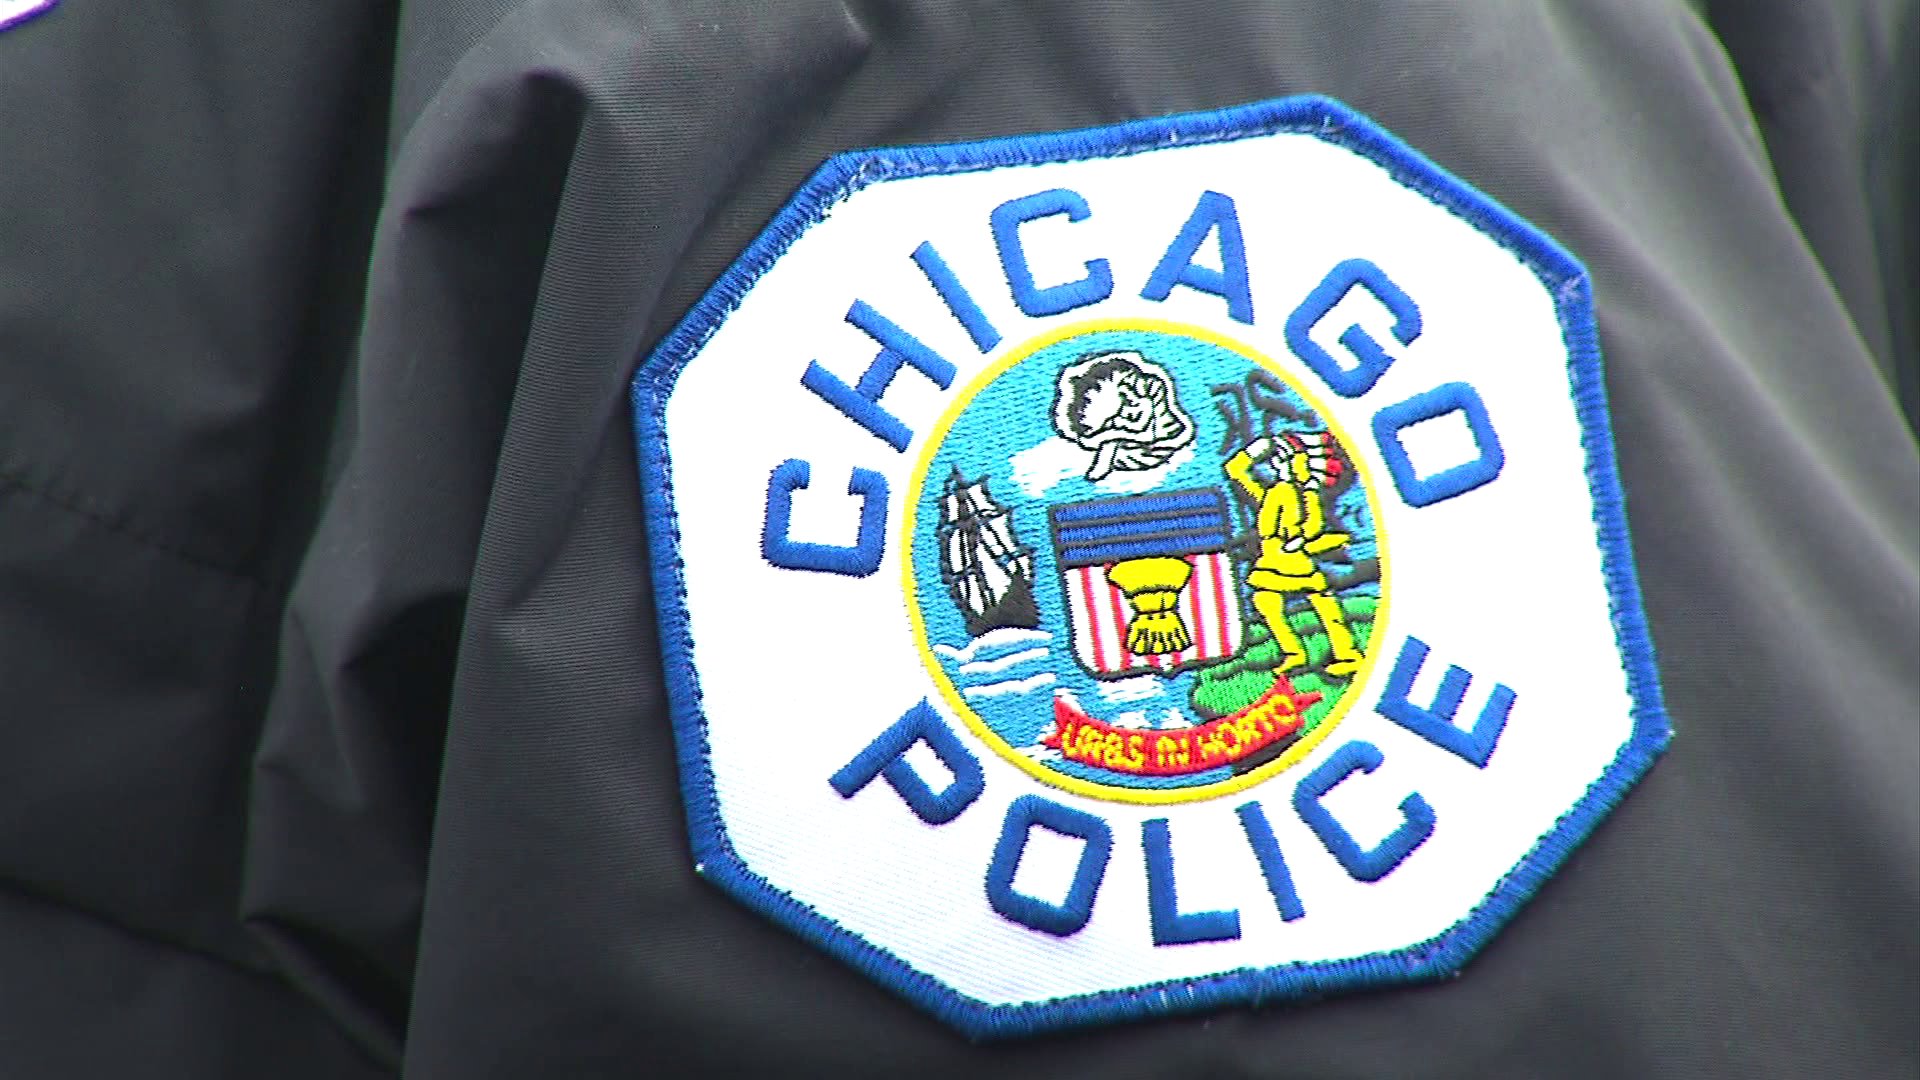 ChicagoPolice